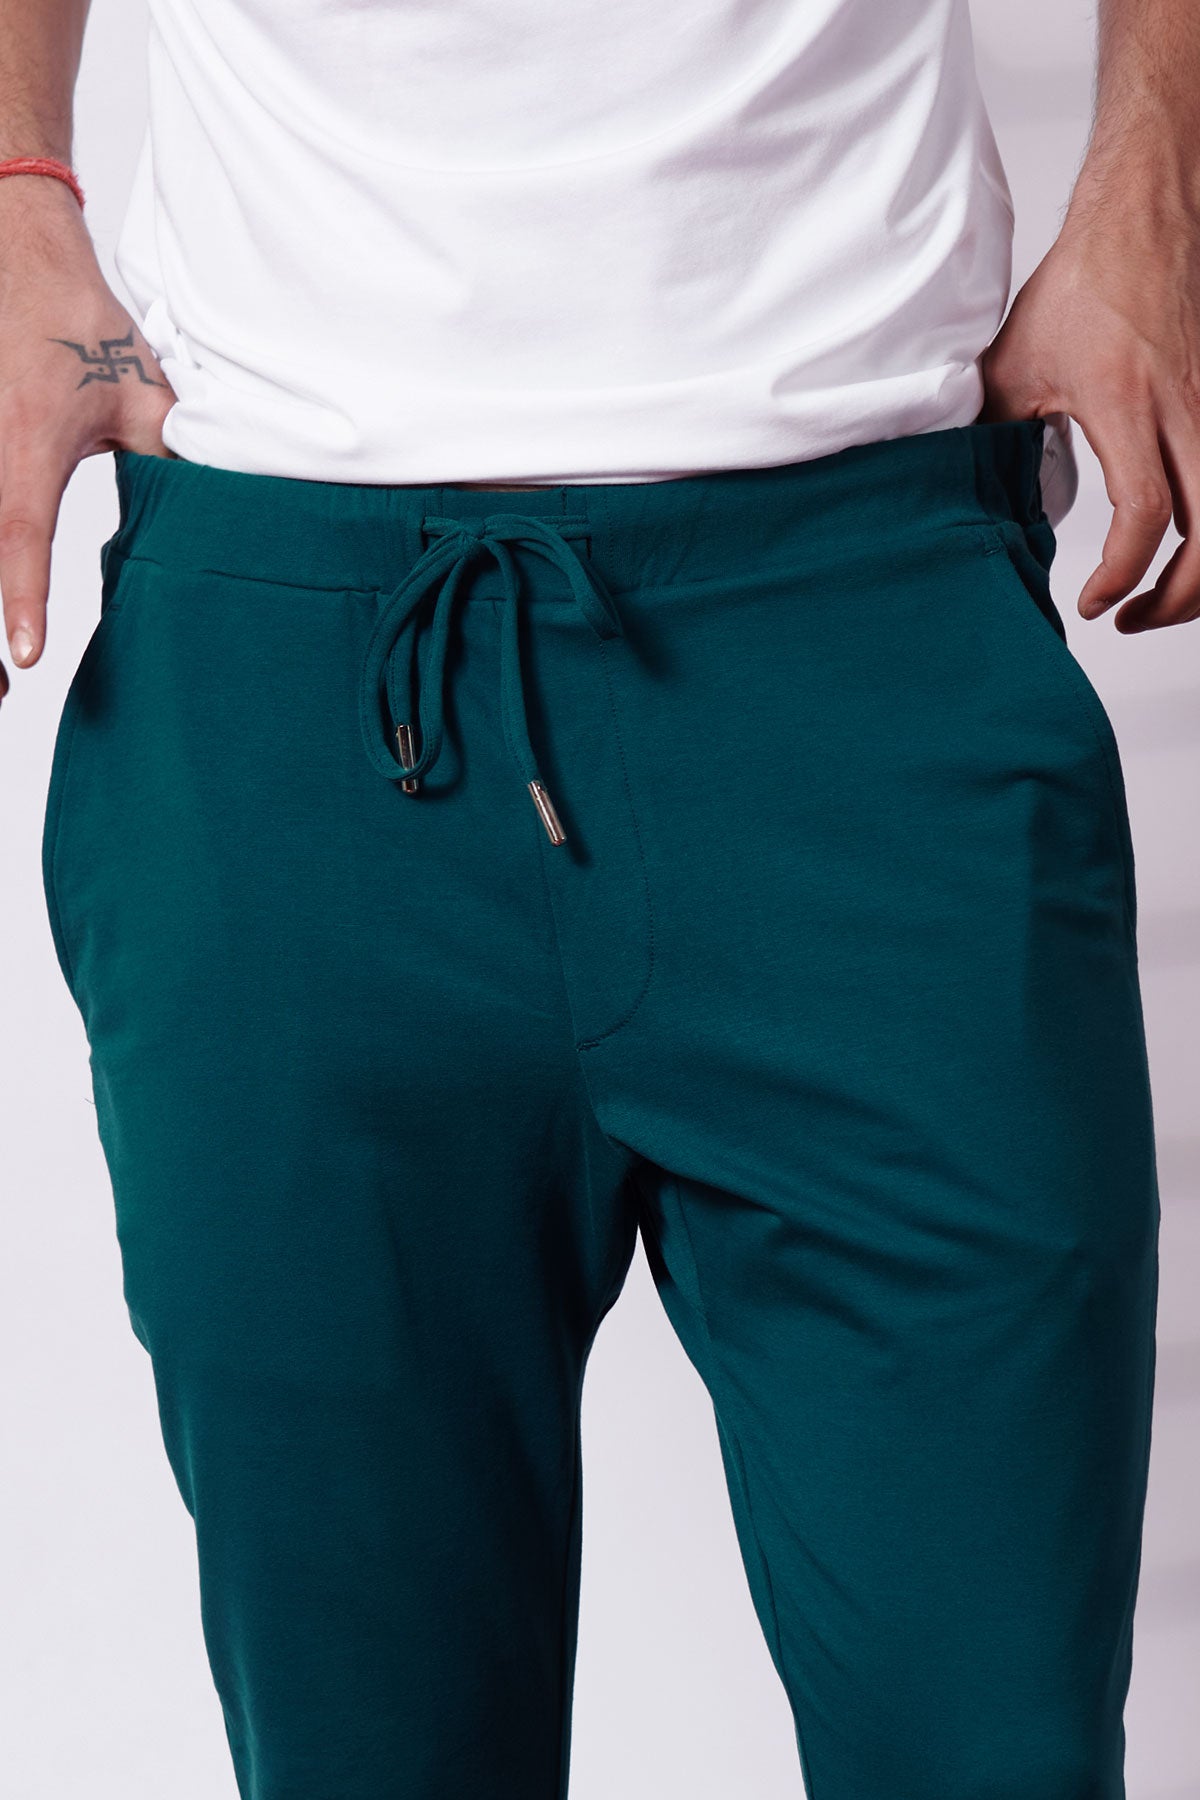 Easy Deep Teal Sweatpant Beyours Essentials Private Limited